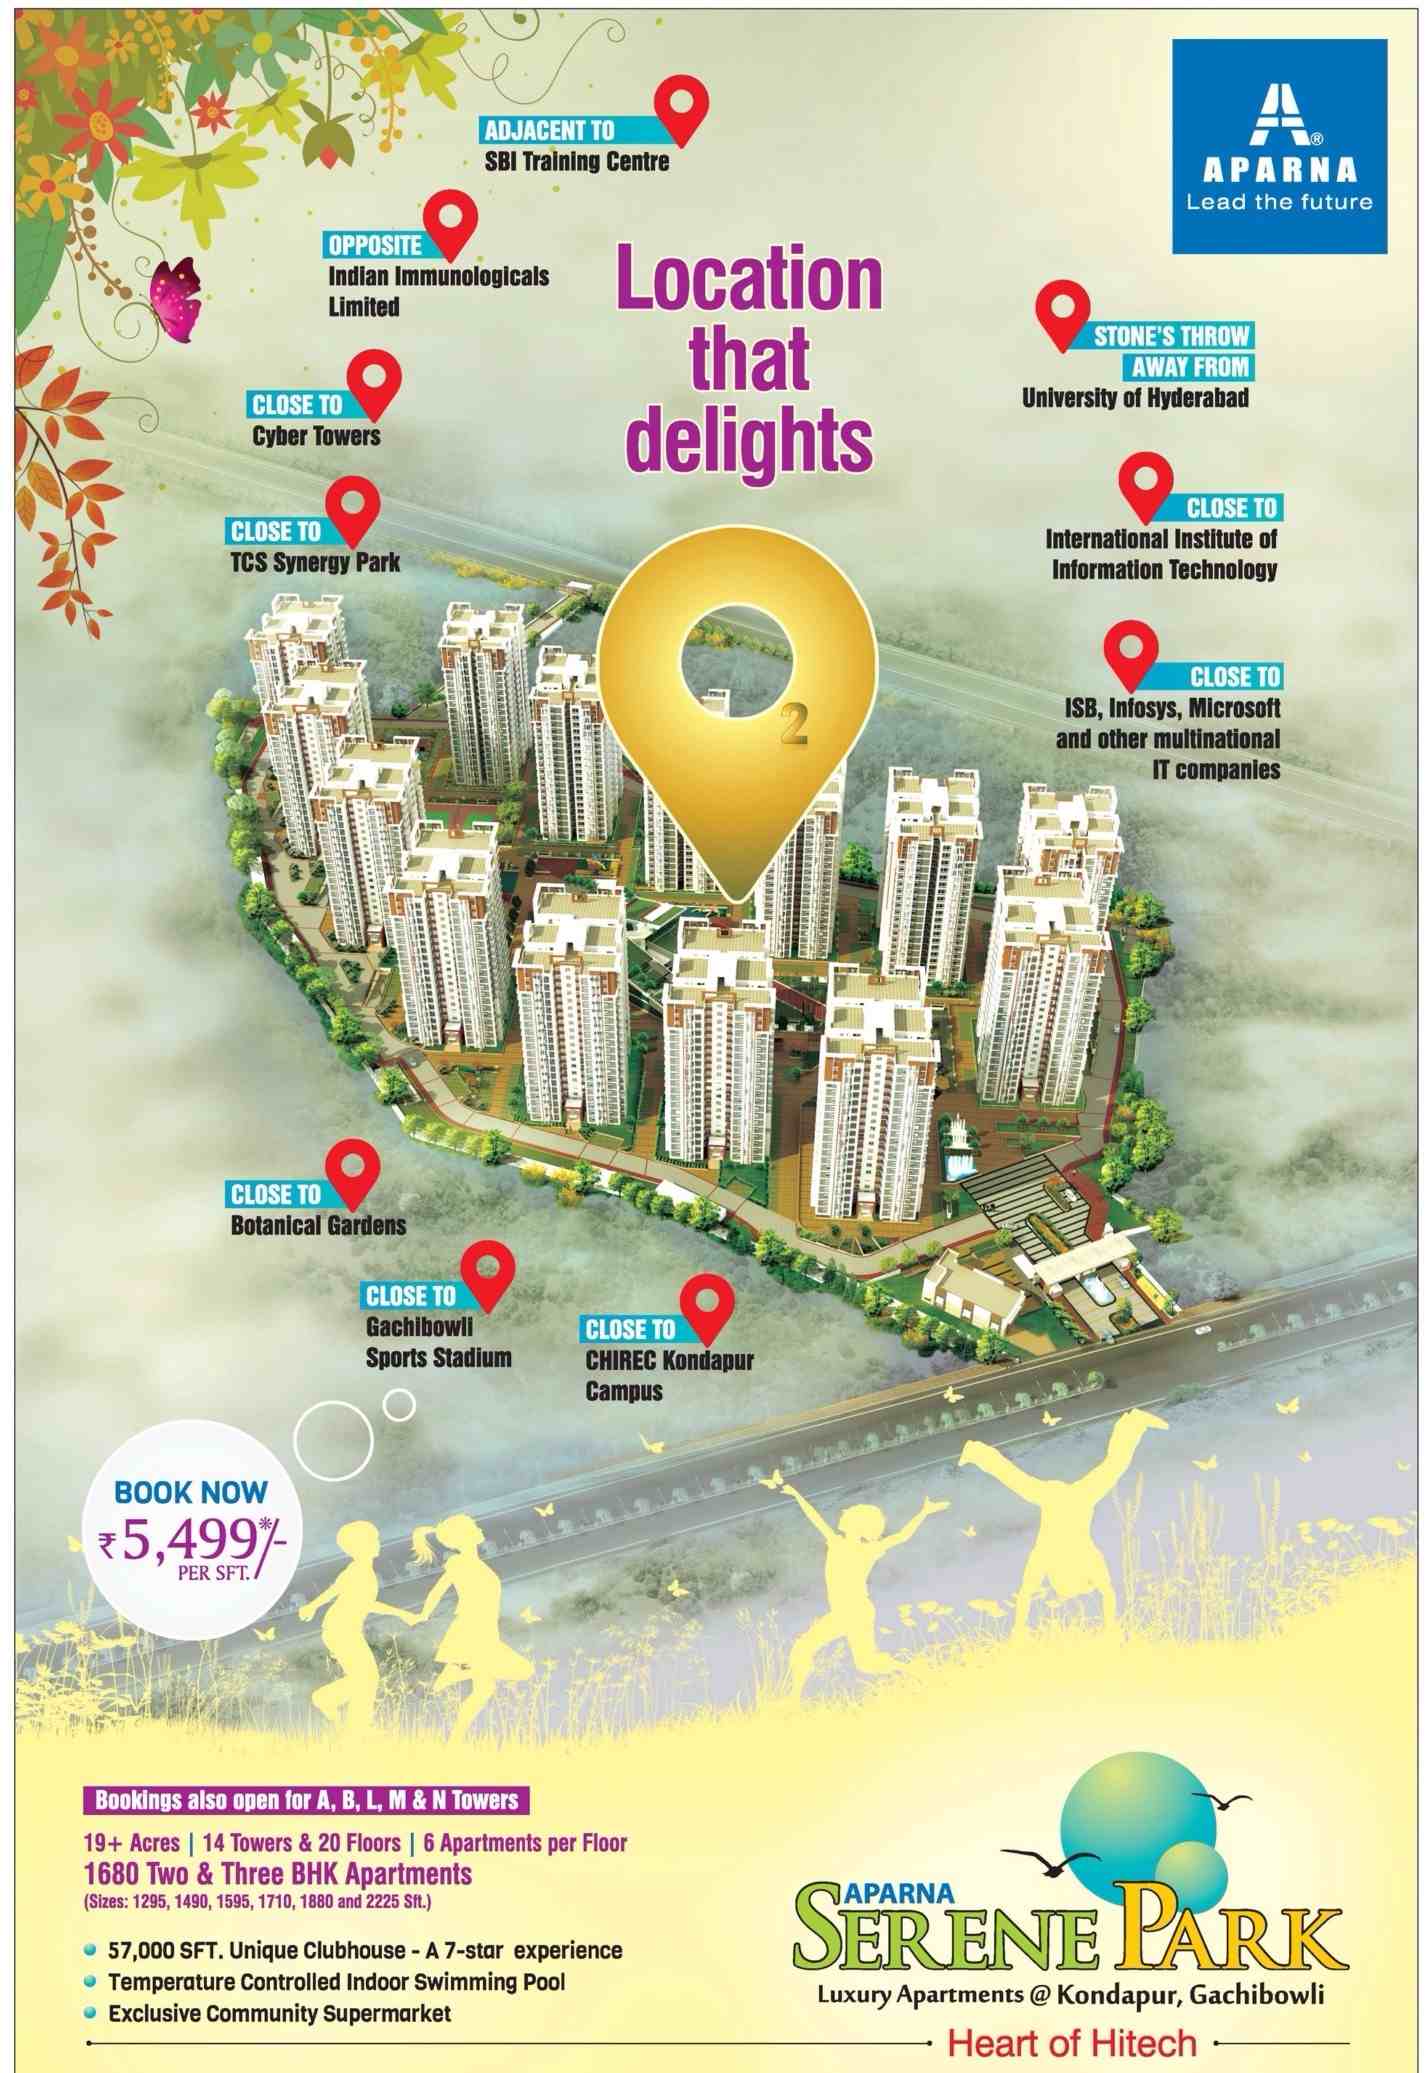 Reside at Aparna Serene Park and be delighted by the location in Hyderabad Update